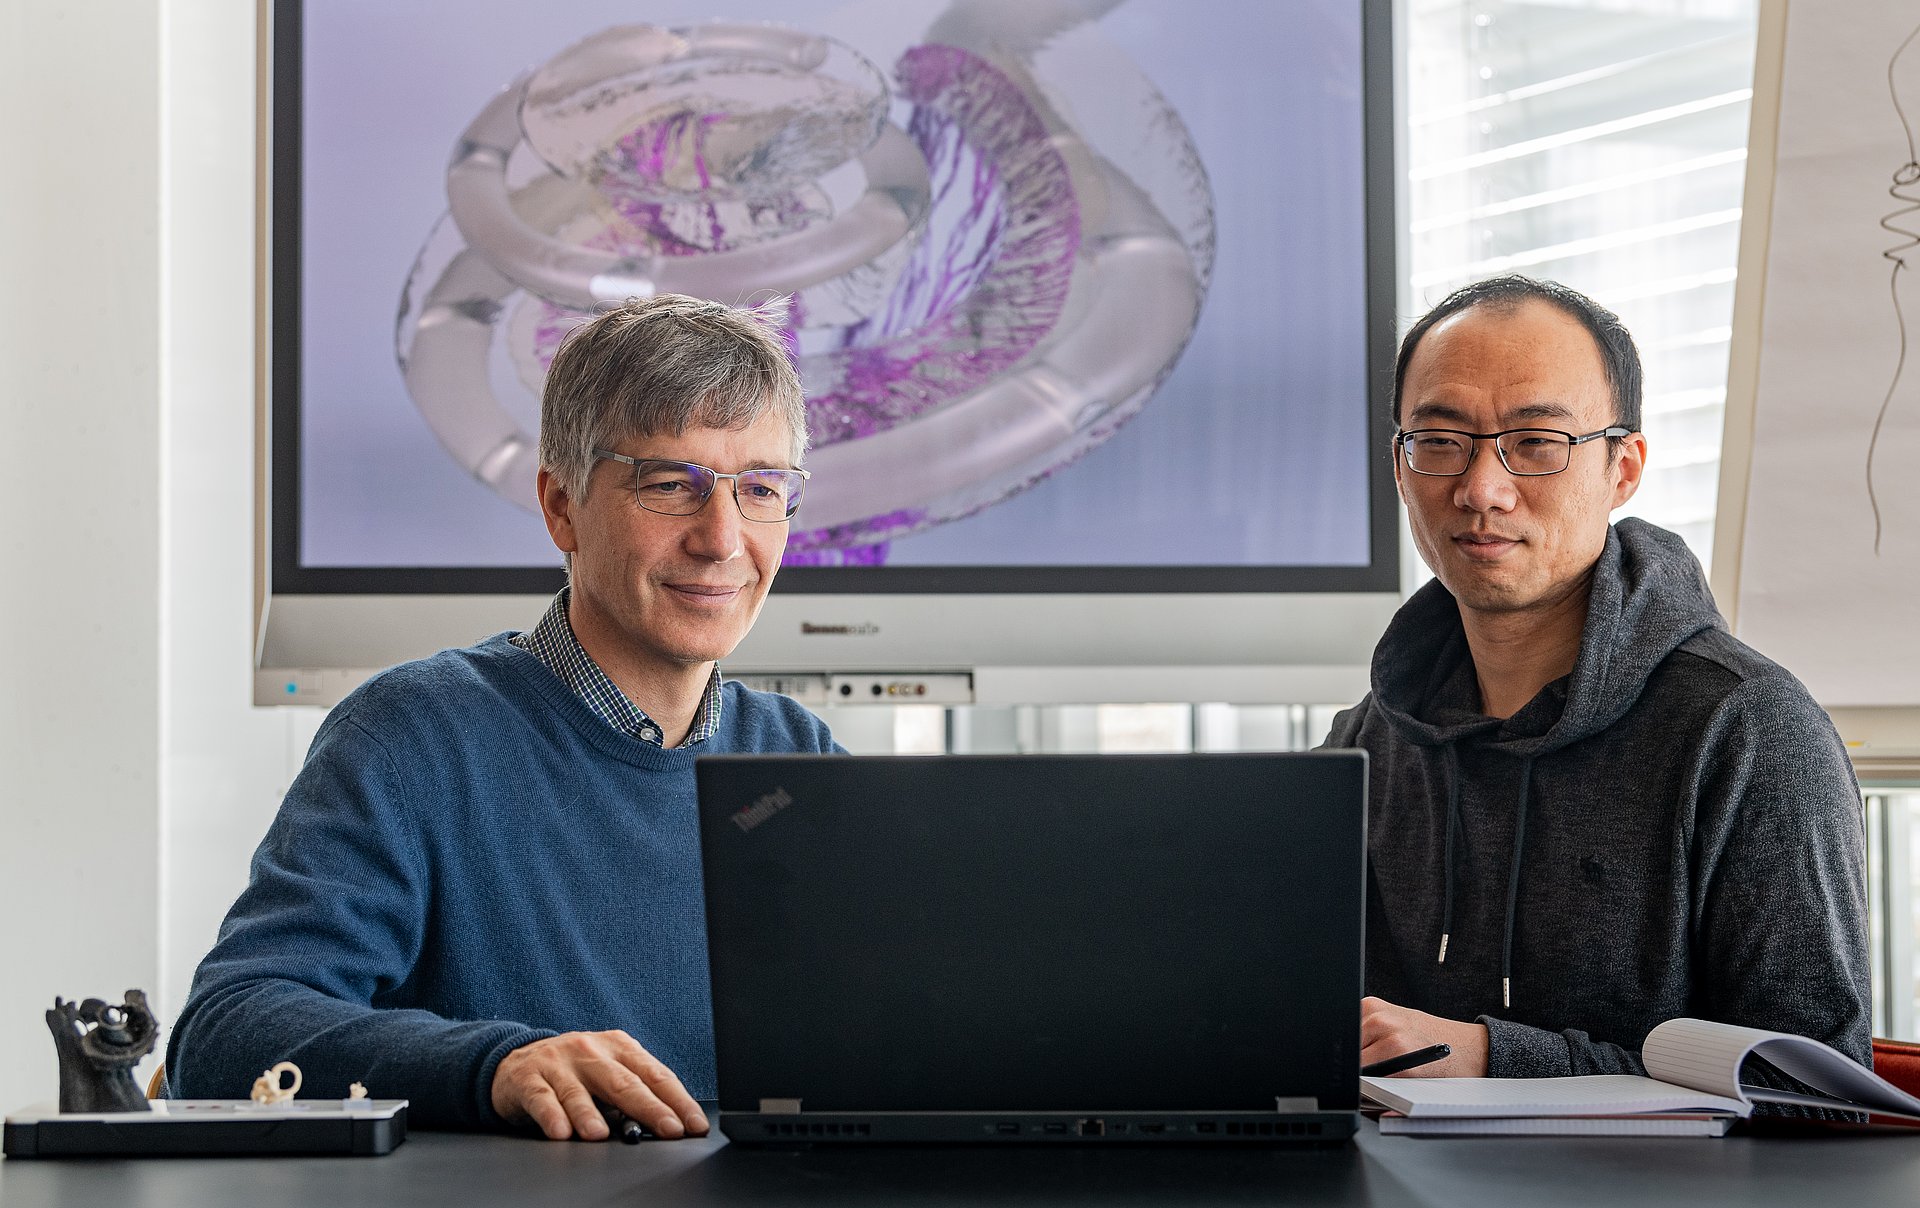 Prof. Dr. Werner Hemmert and Dr. Siwei Bai have developed a computer model which predicts the neuronal activation patterns that cochlea implants create in the auditory nerve. 